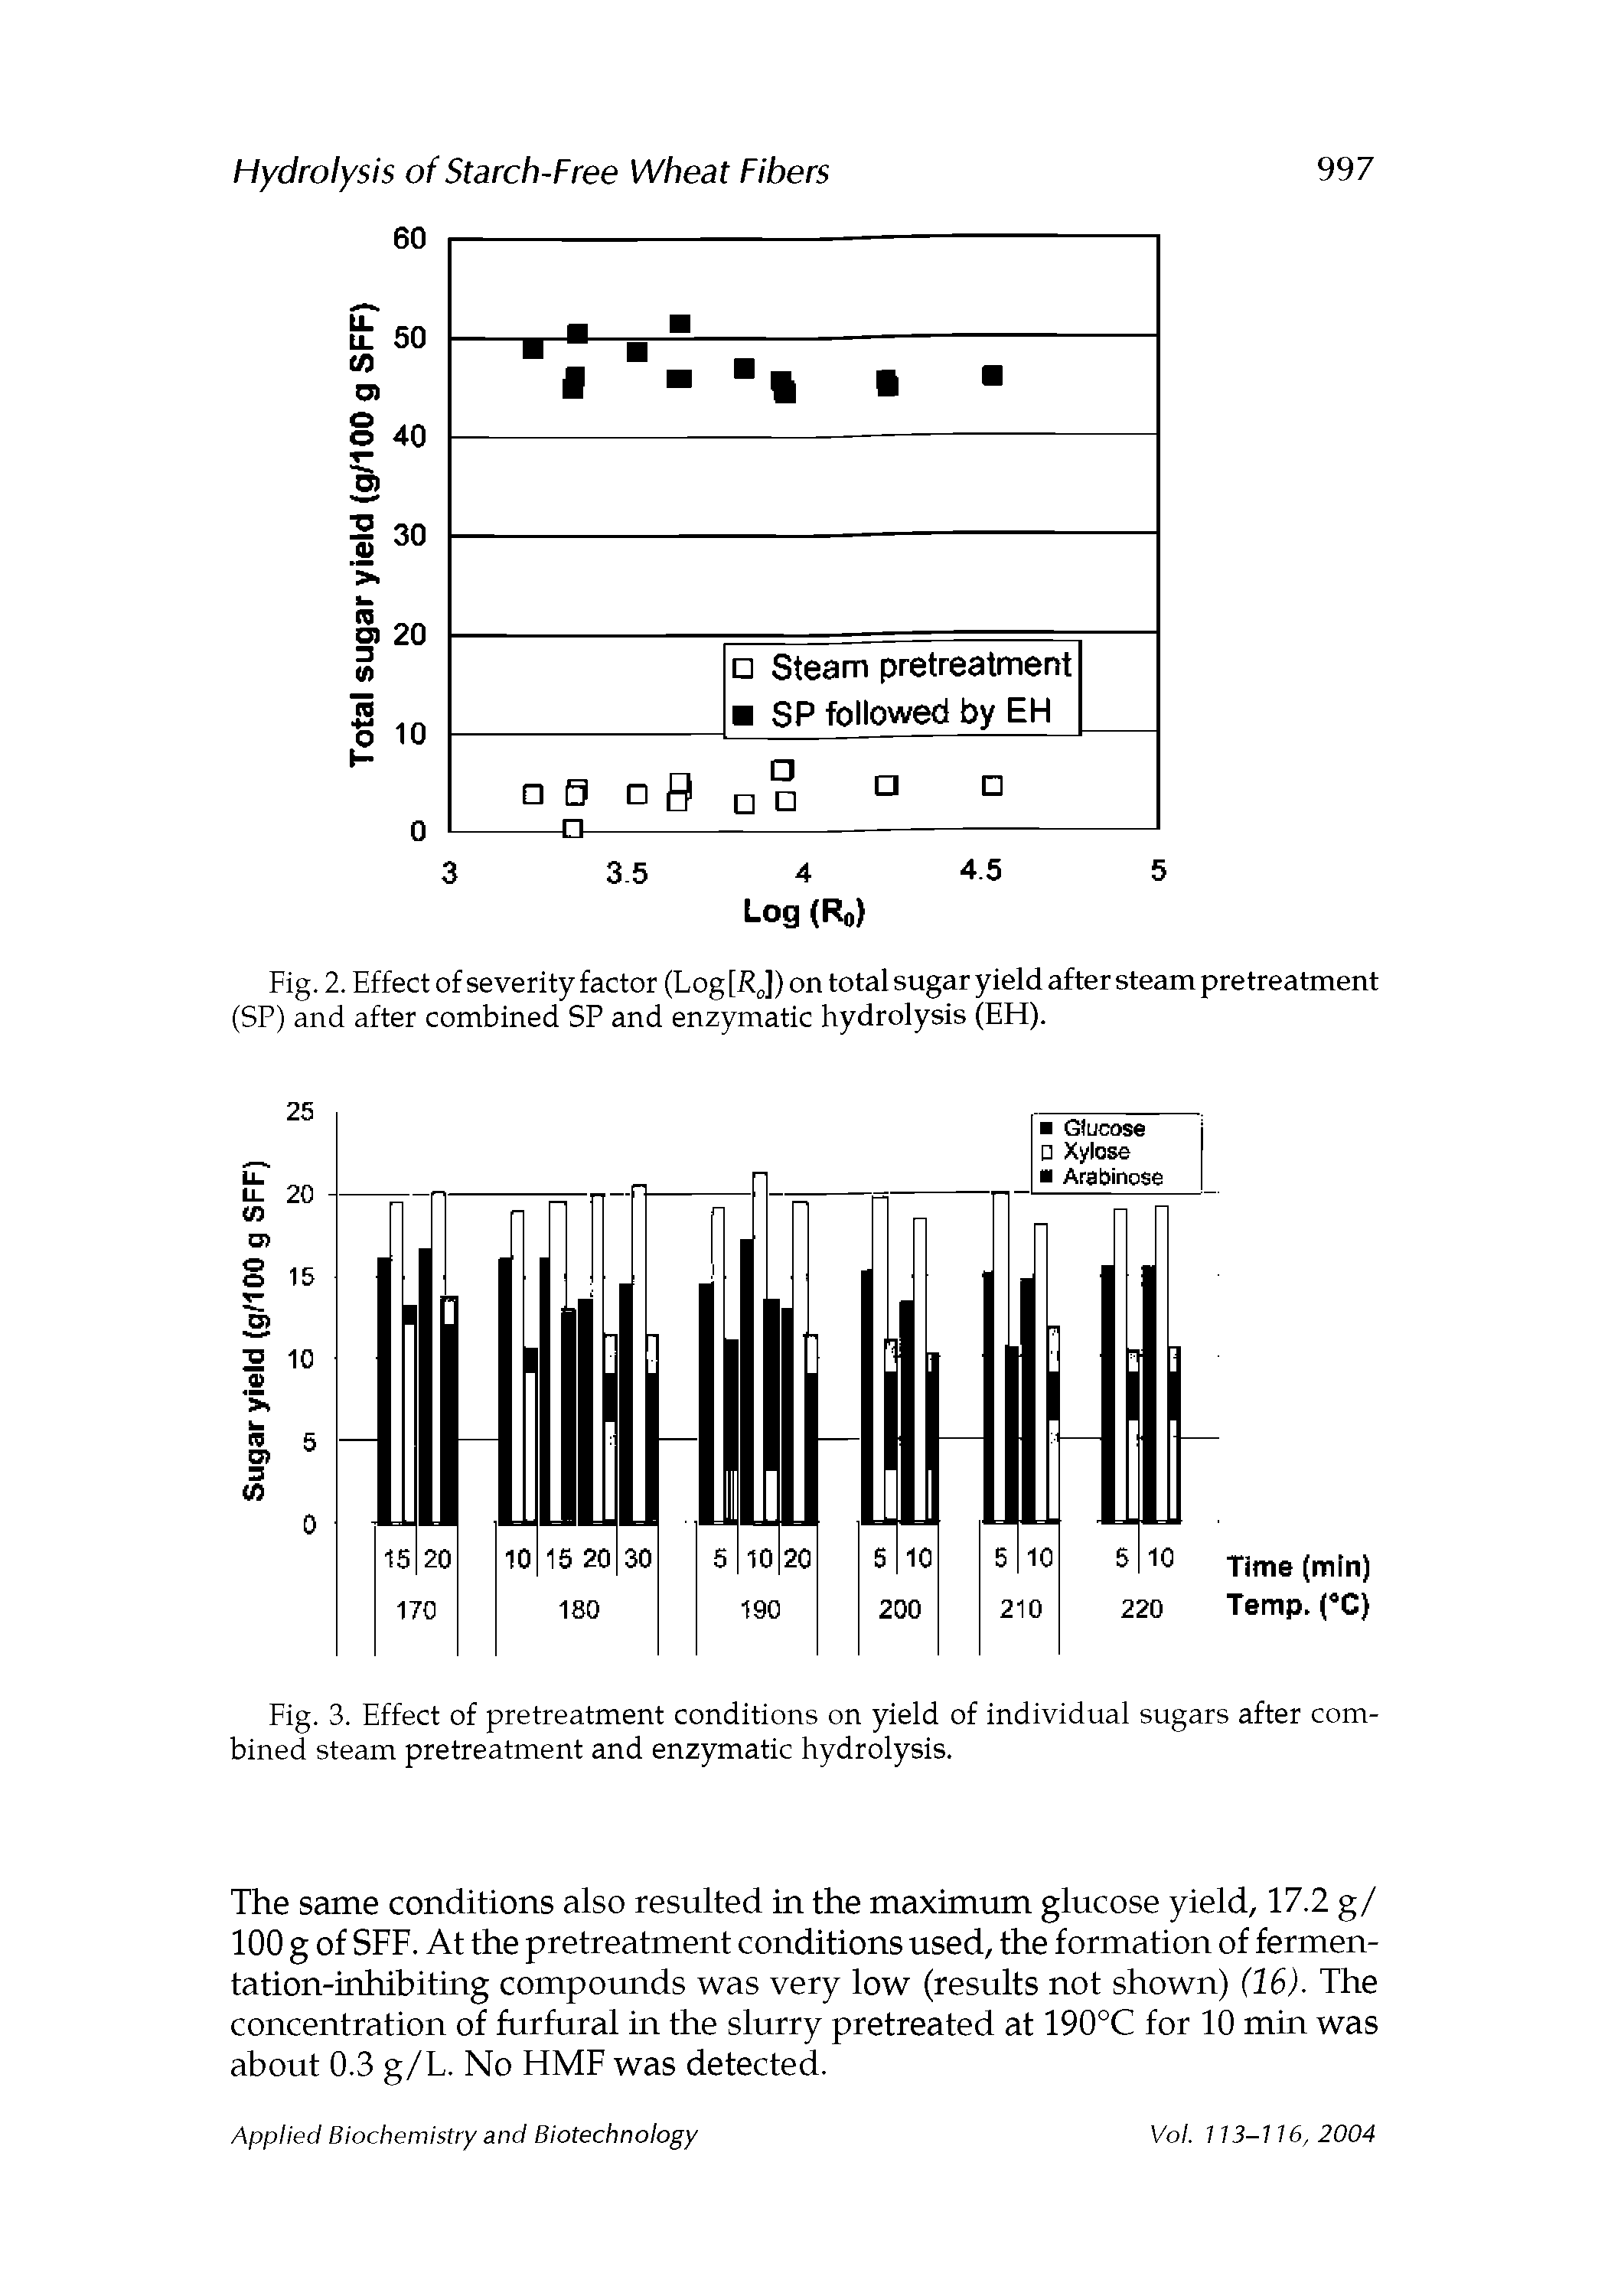 Fig. 2. Effect of severity factor (Log [R0]) on total sugar yield after steam pretreatment (SP) and after combined SP and enzymatic hydrolysis (EH).